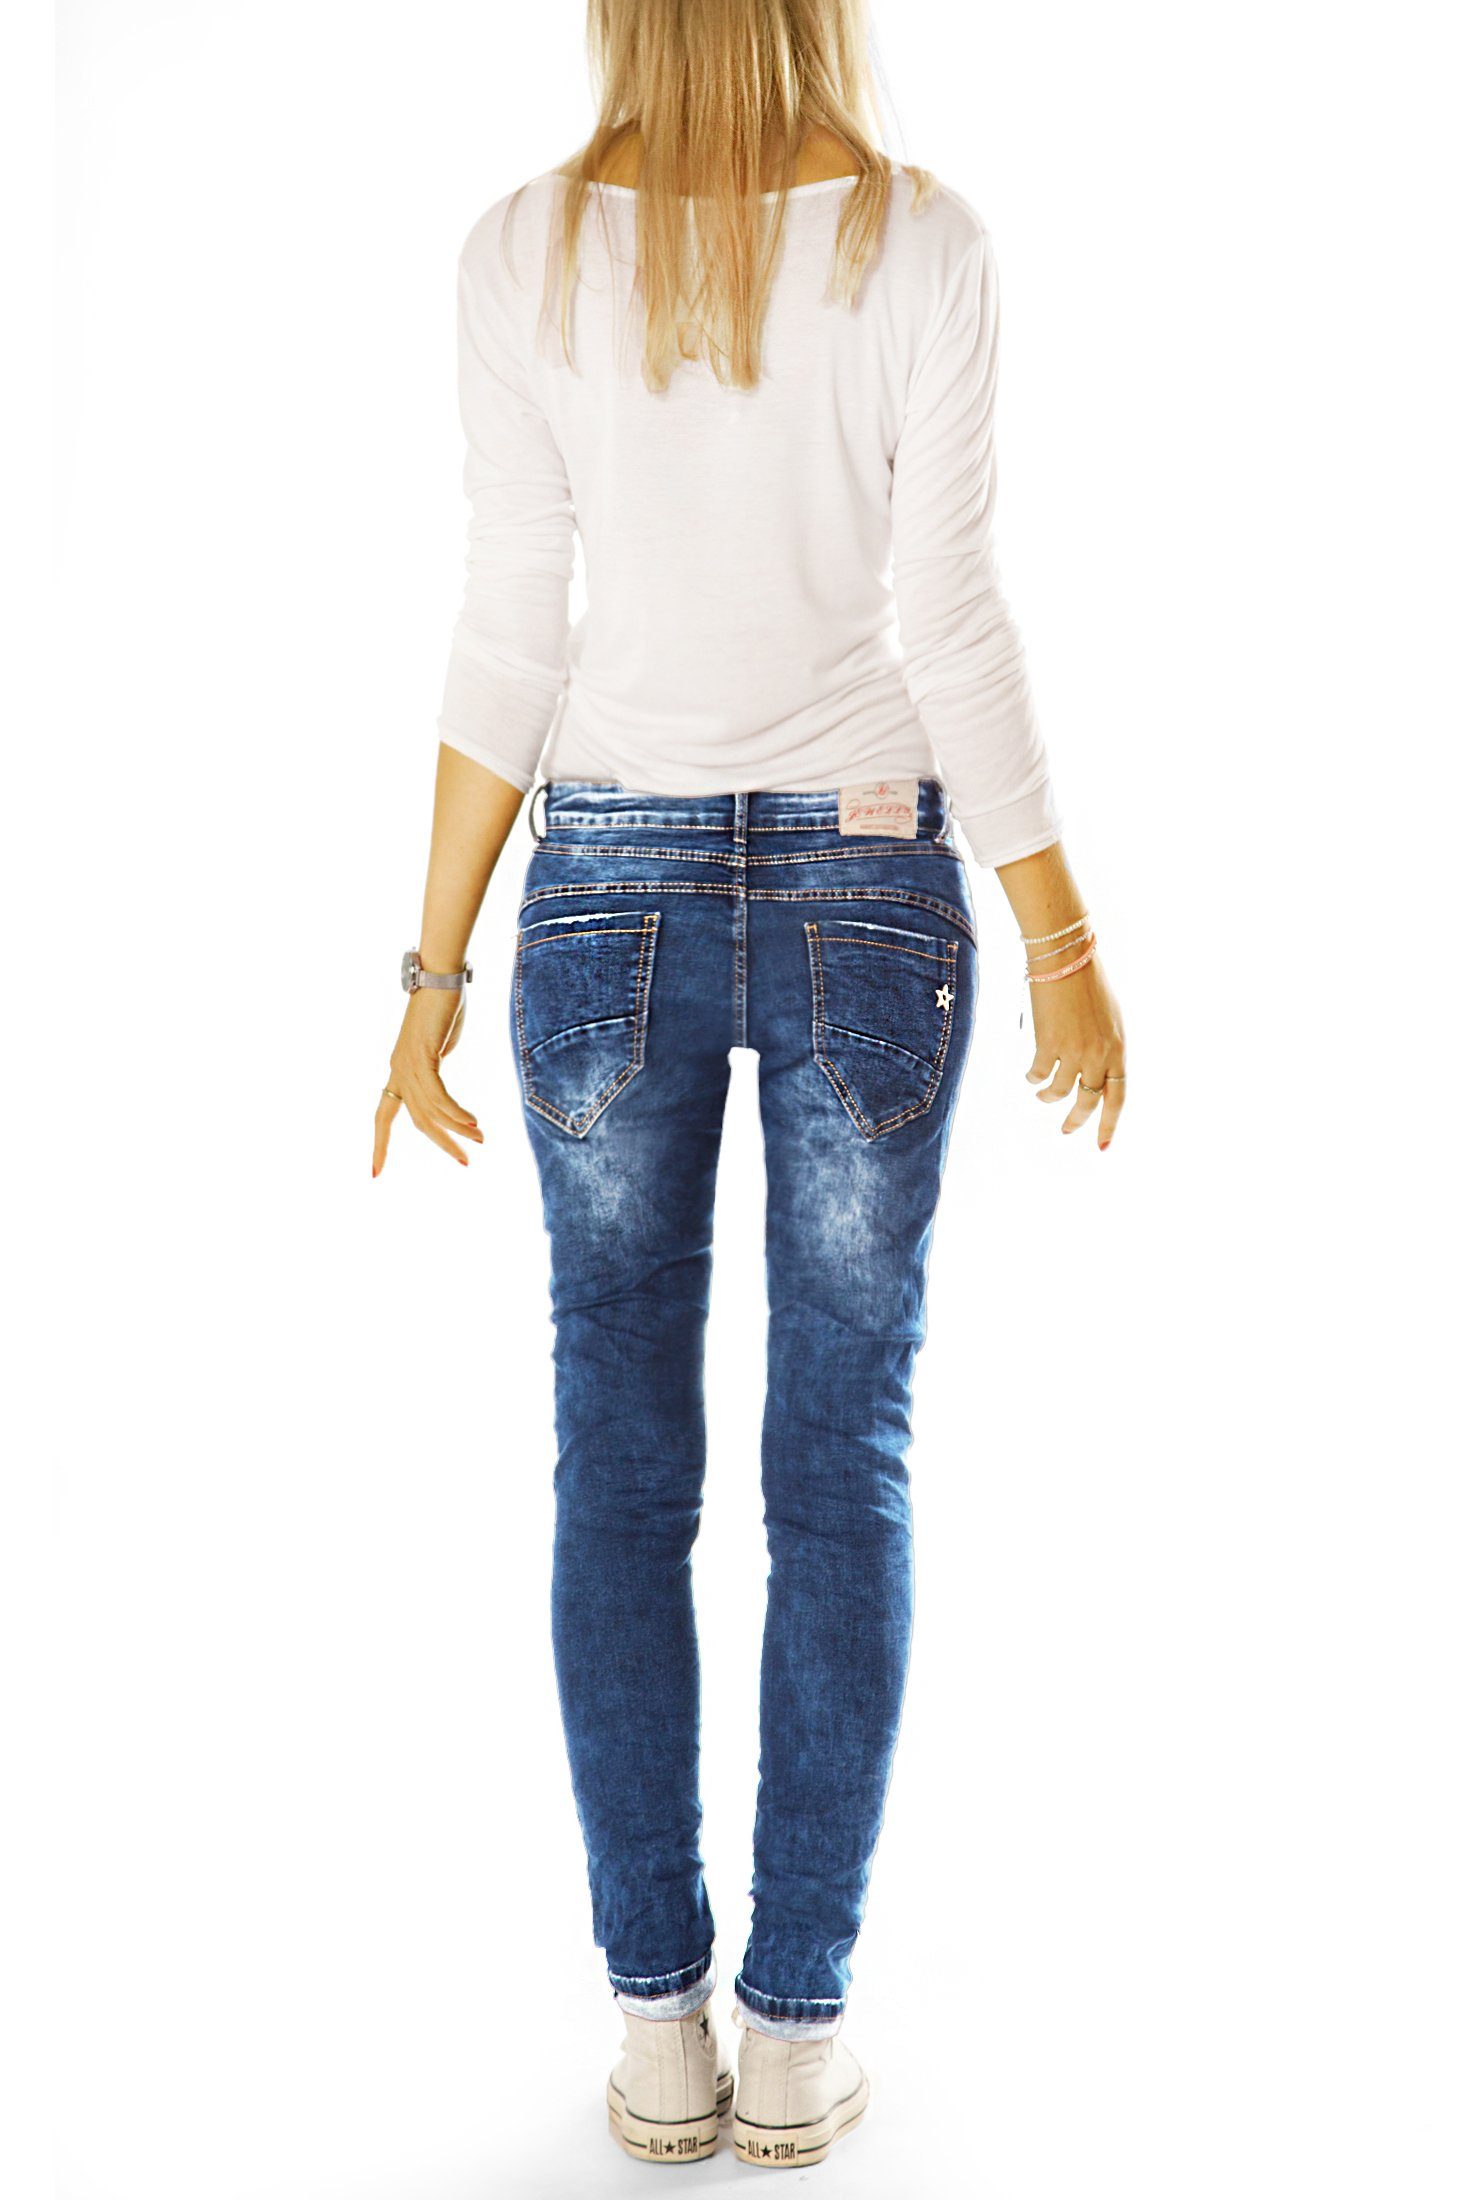 Fit styled Fit 5-Pocket-Style Hüftjeans Hose be Slim-fit-Jeans Relaxed Damen Slim Stretch-Anteil, Look im mit - - j4g-1